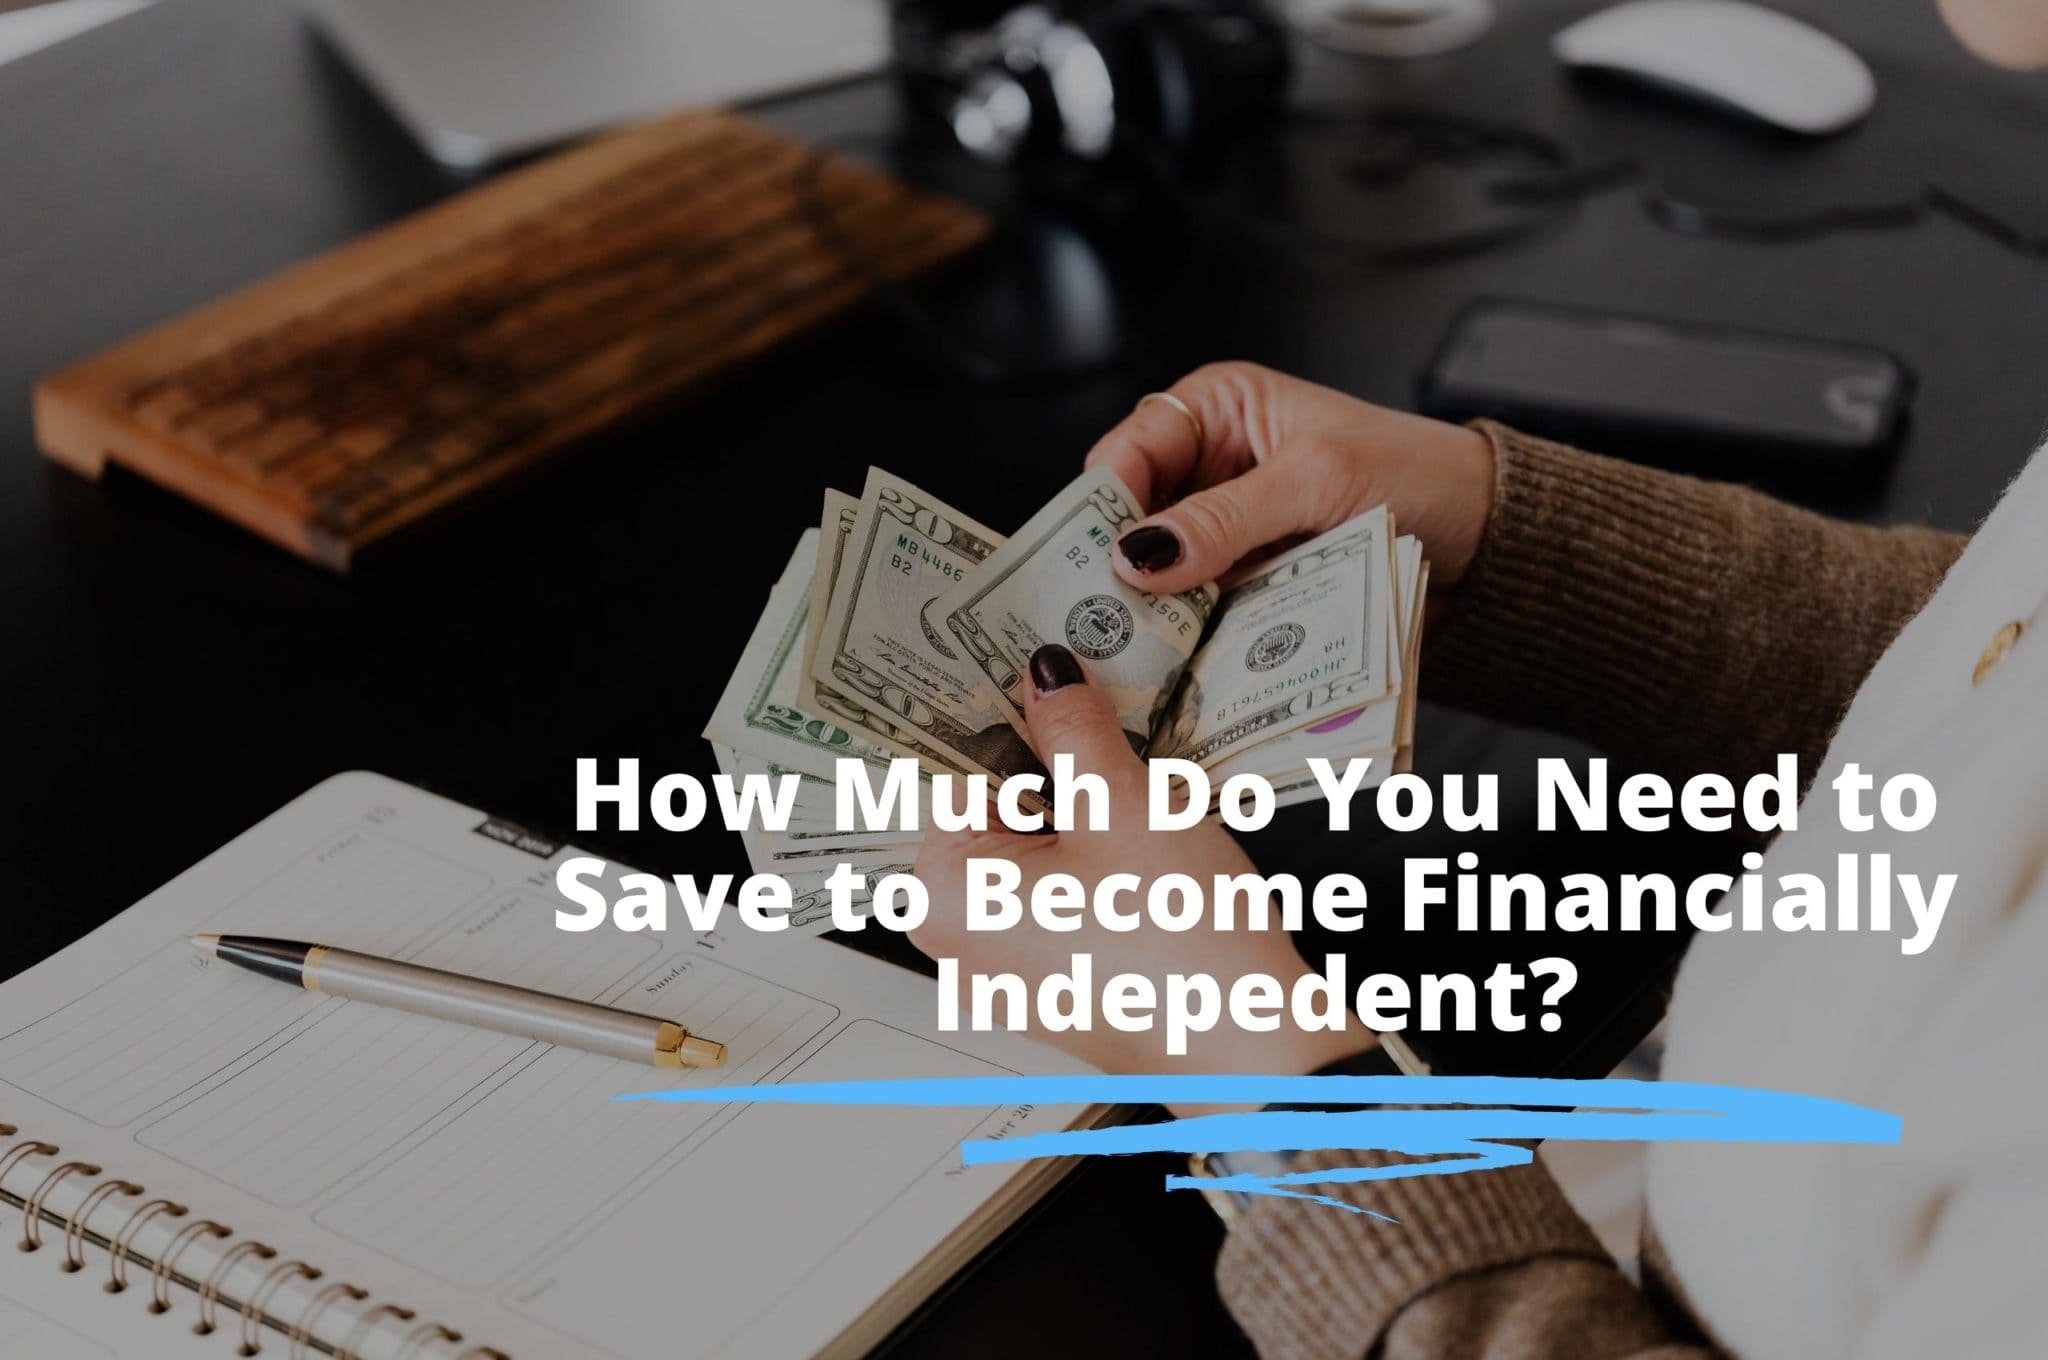 Financial Independence: How Much of Your Income Do You Need to Save? 1